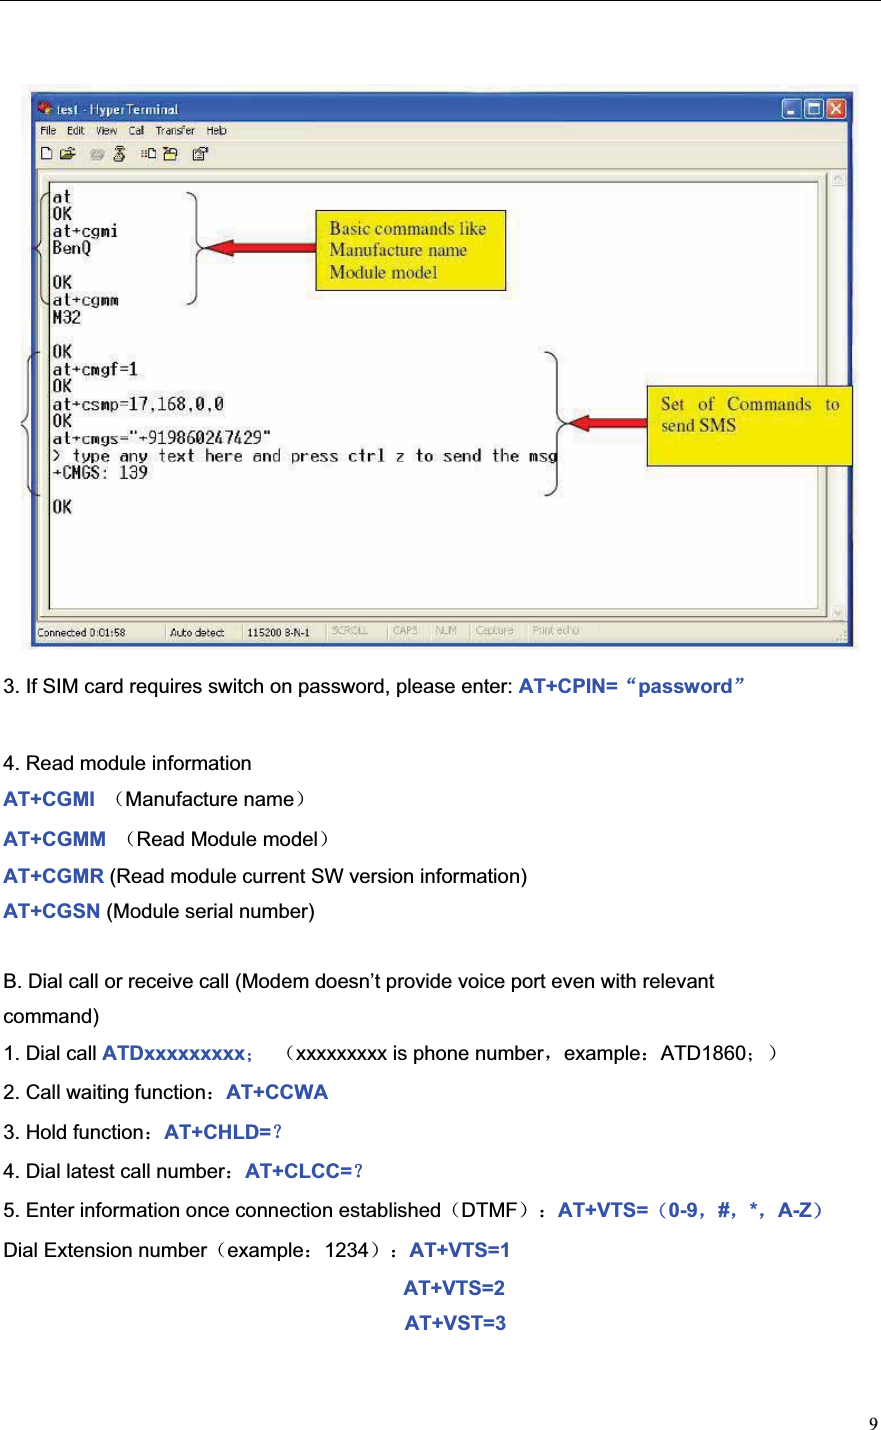 93. If SIM card requires switch on password, please enter: AT+CPIN=Āpasswordā4. Read module information AT+CGMI  ˄Manufacture name˅AT+CGMM  ˄Read Module model˅AT+CGMR (Read module current SW version information) AT+CGSN (Module serial number) B. Dial call or receive call (Modem doesn’t provide voice port even with relevant command) 1. Dial call ATDxxxxxxxxx˗˄xxxxxxxxx is phone numberˈexample˖ATD1860˗˅2. Call waiting function˖AT+CCWA 3. Hold function˖AT+CHLD=˛4. Dial latest call number˖AT+CLCC=˛5. Enter information once connection established˄DTMF˅˖AT+VTS=˄0-9ˈ#ˈ*ˈA-Z˅Dial Extension number˄example˖1234˅˖AT+VTS=1 AT+VTS=2 AT+VST=3 